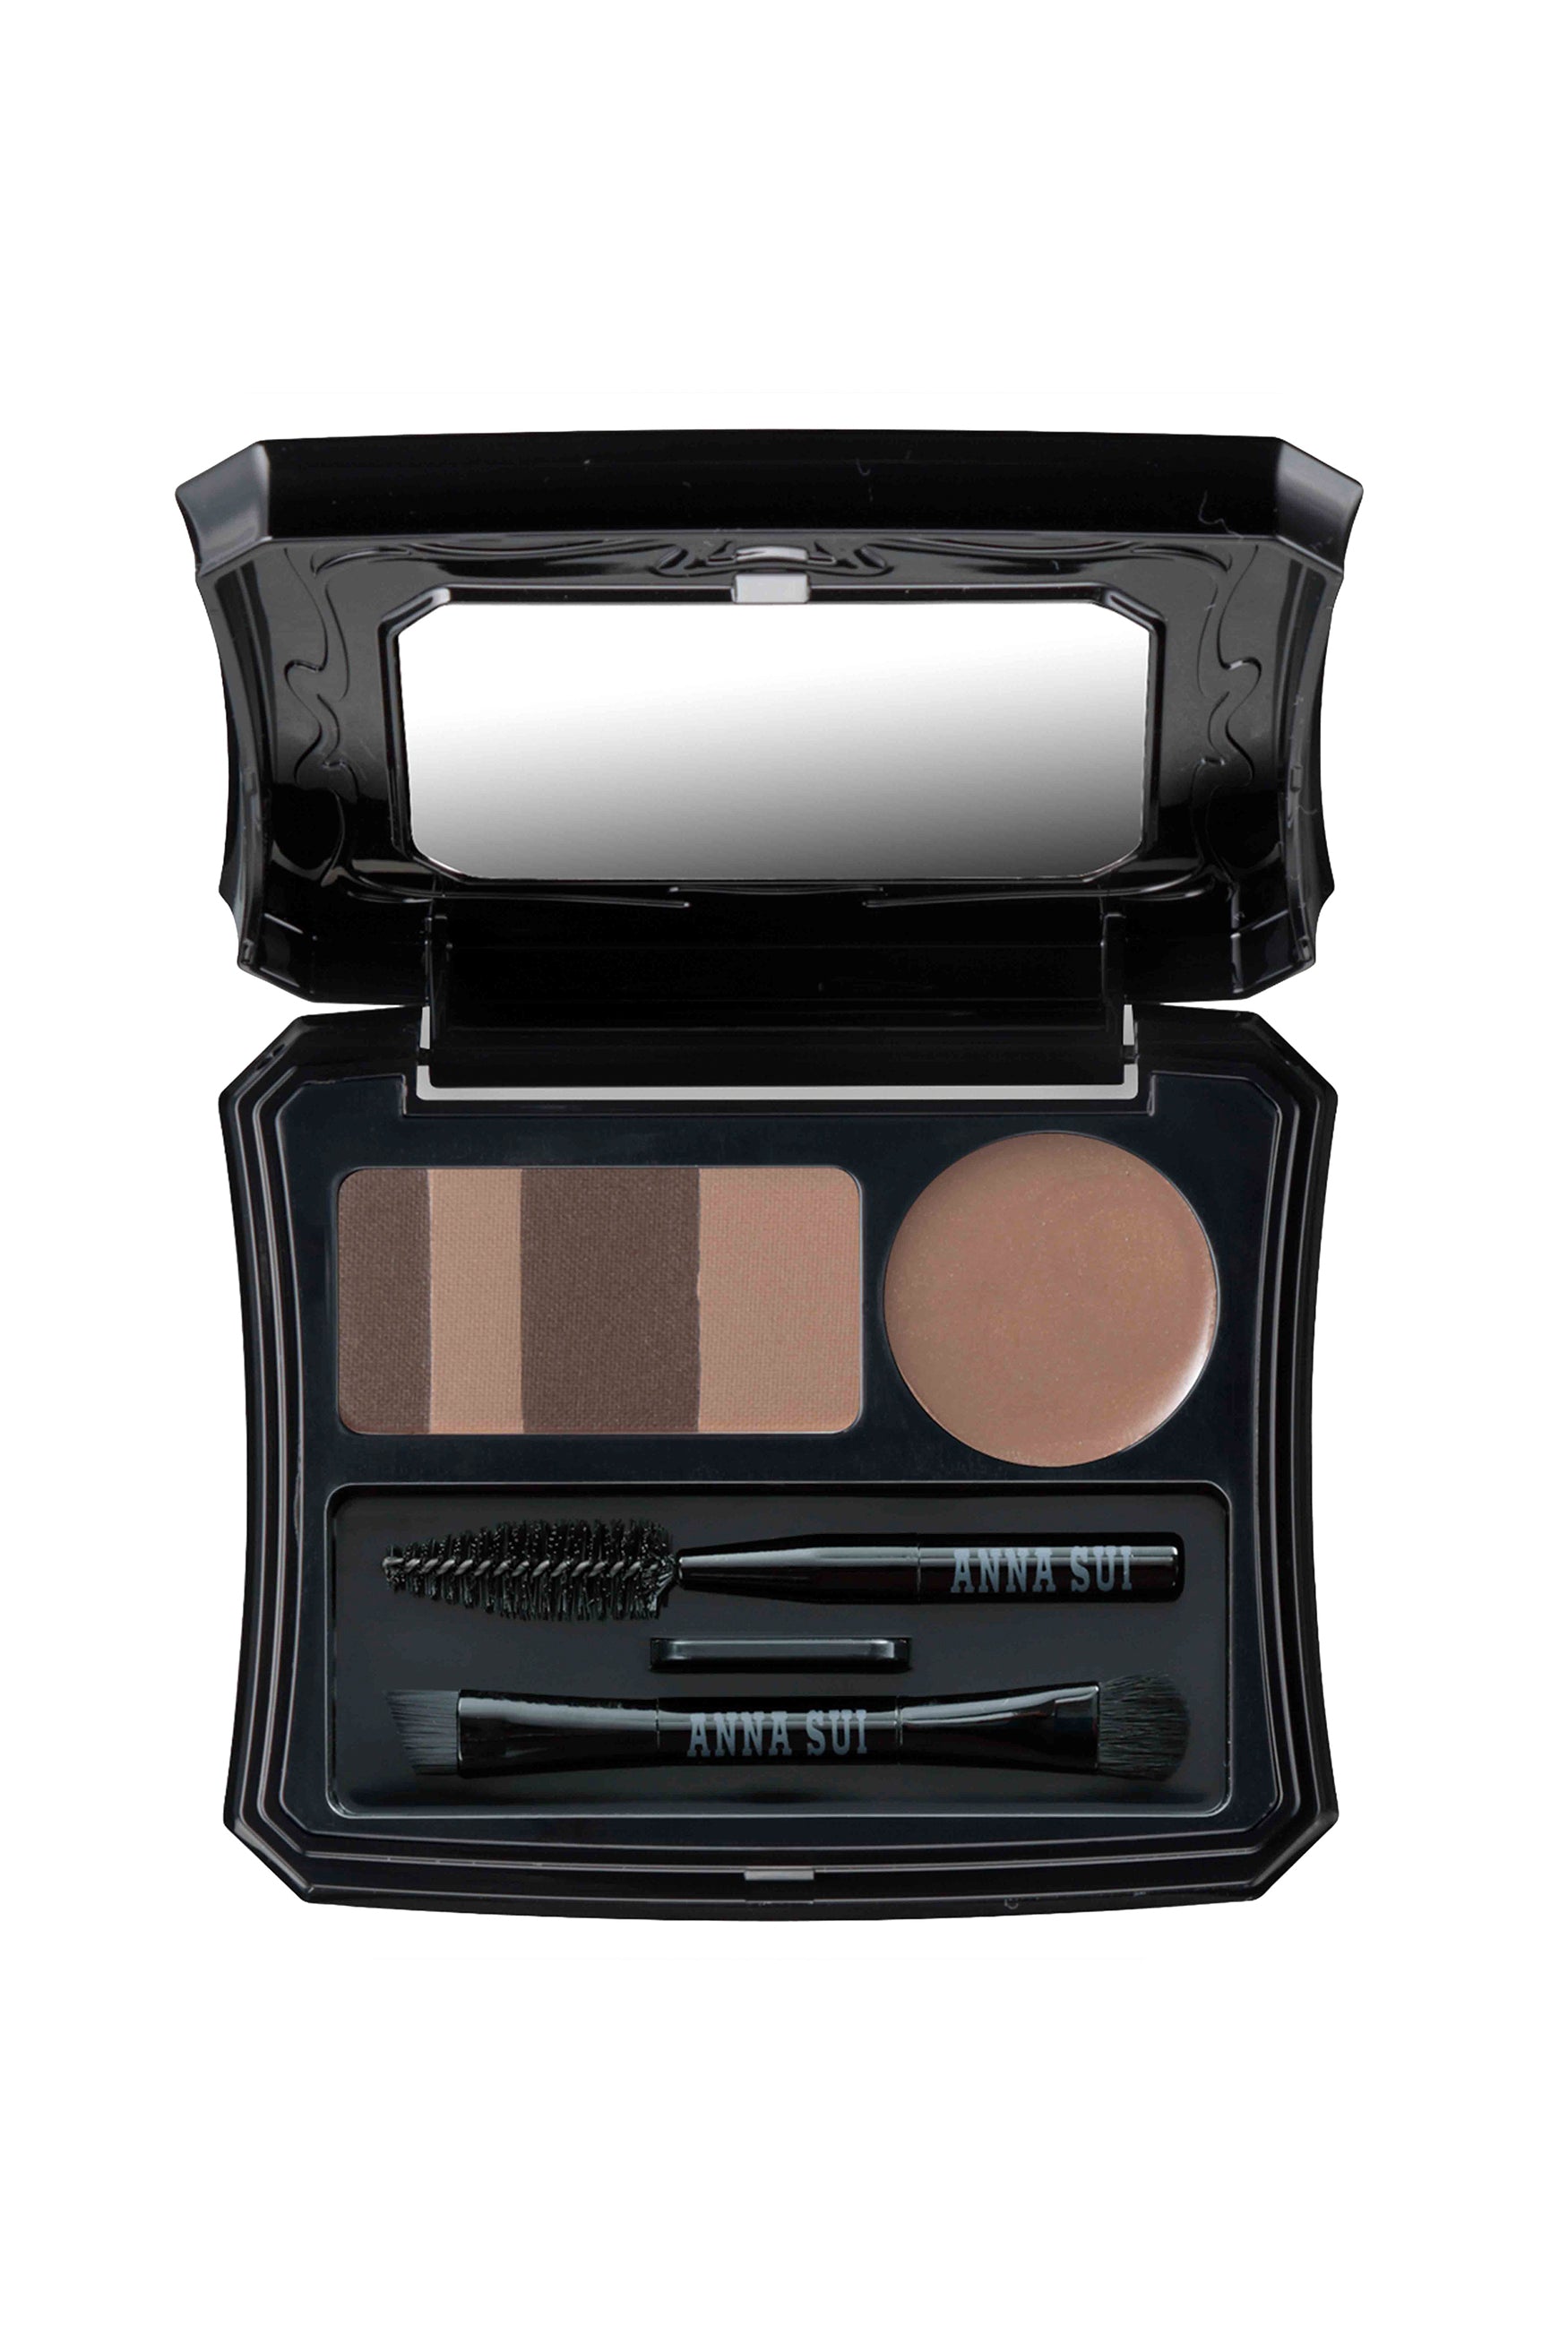 SOFT BROWN Designed to provide a complete brow look with this pallete alone